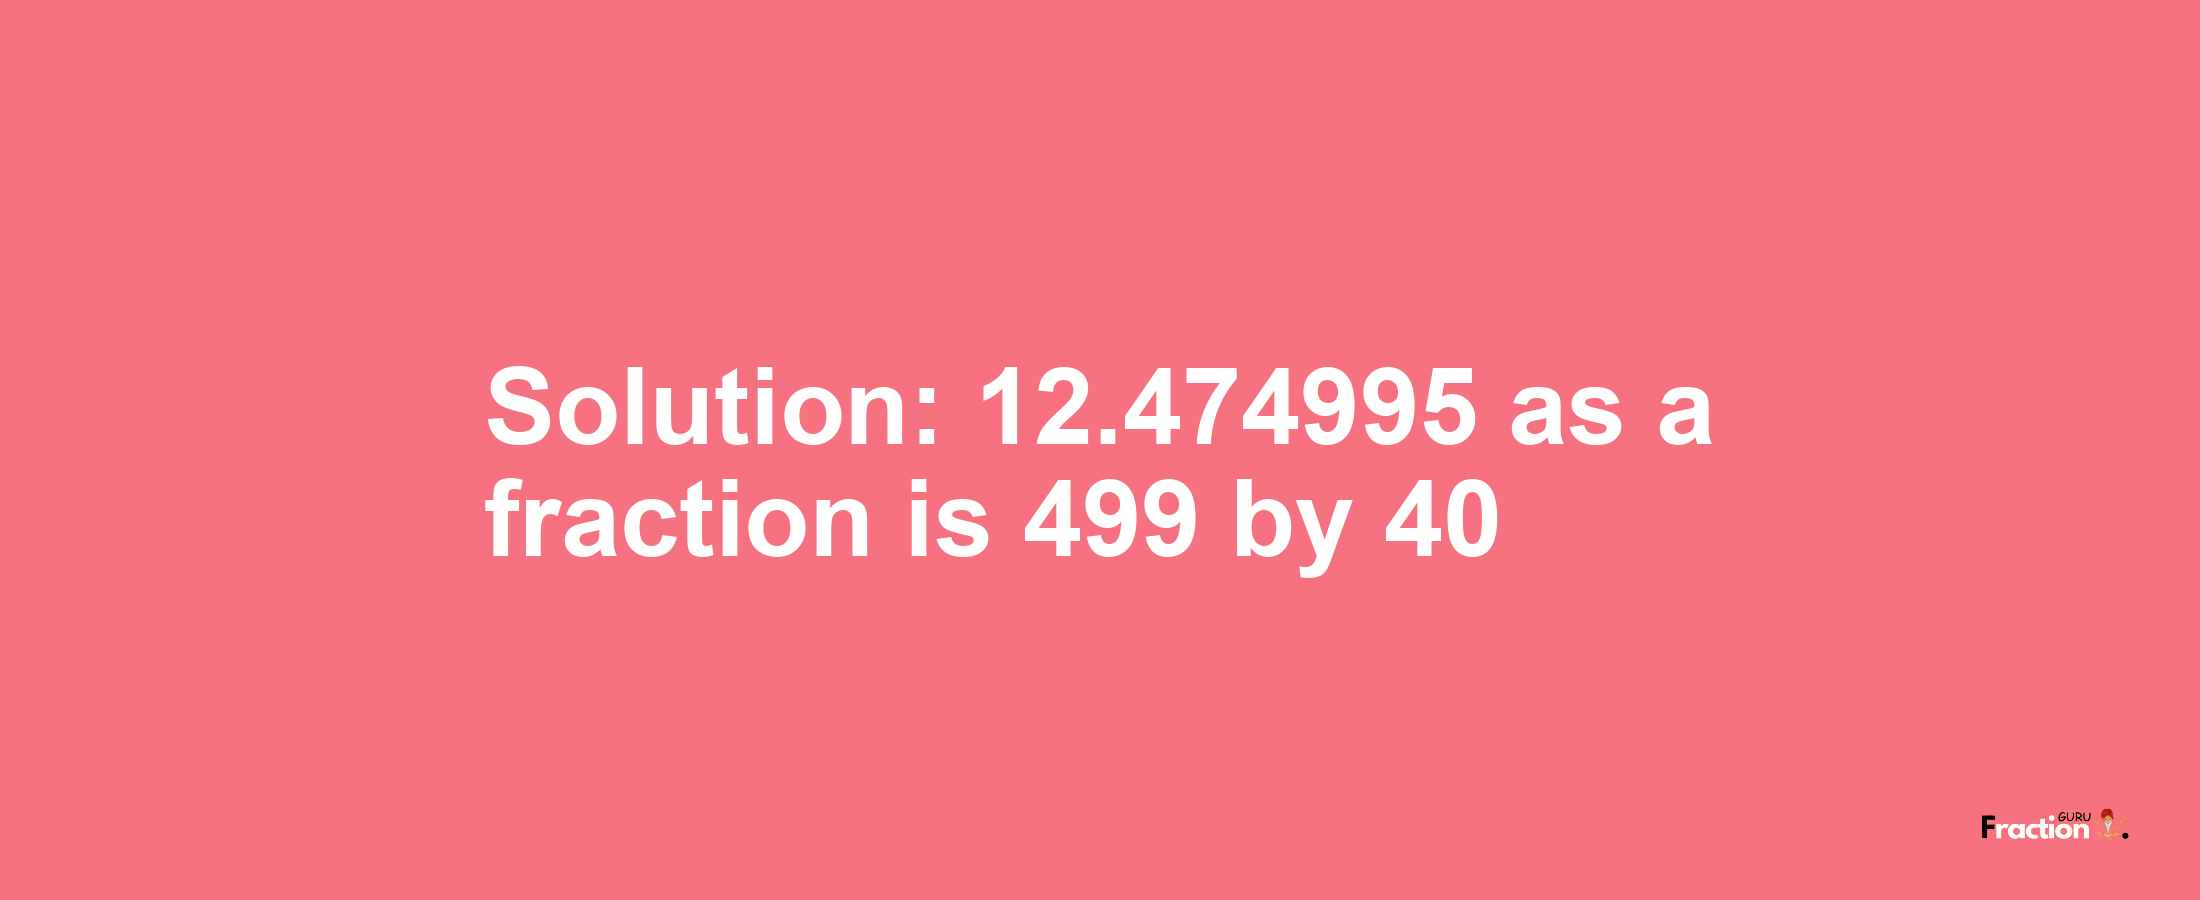 Solution:12.474995 as a fraction is 499/40